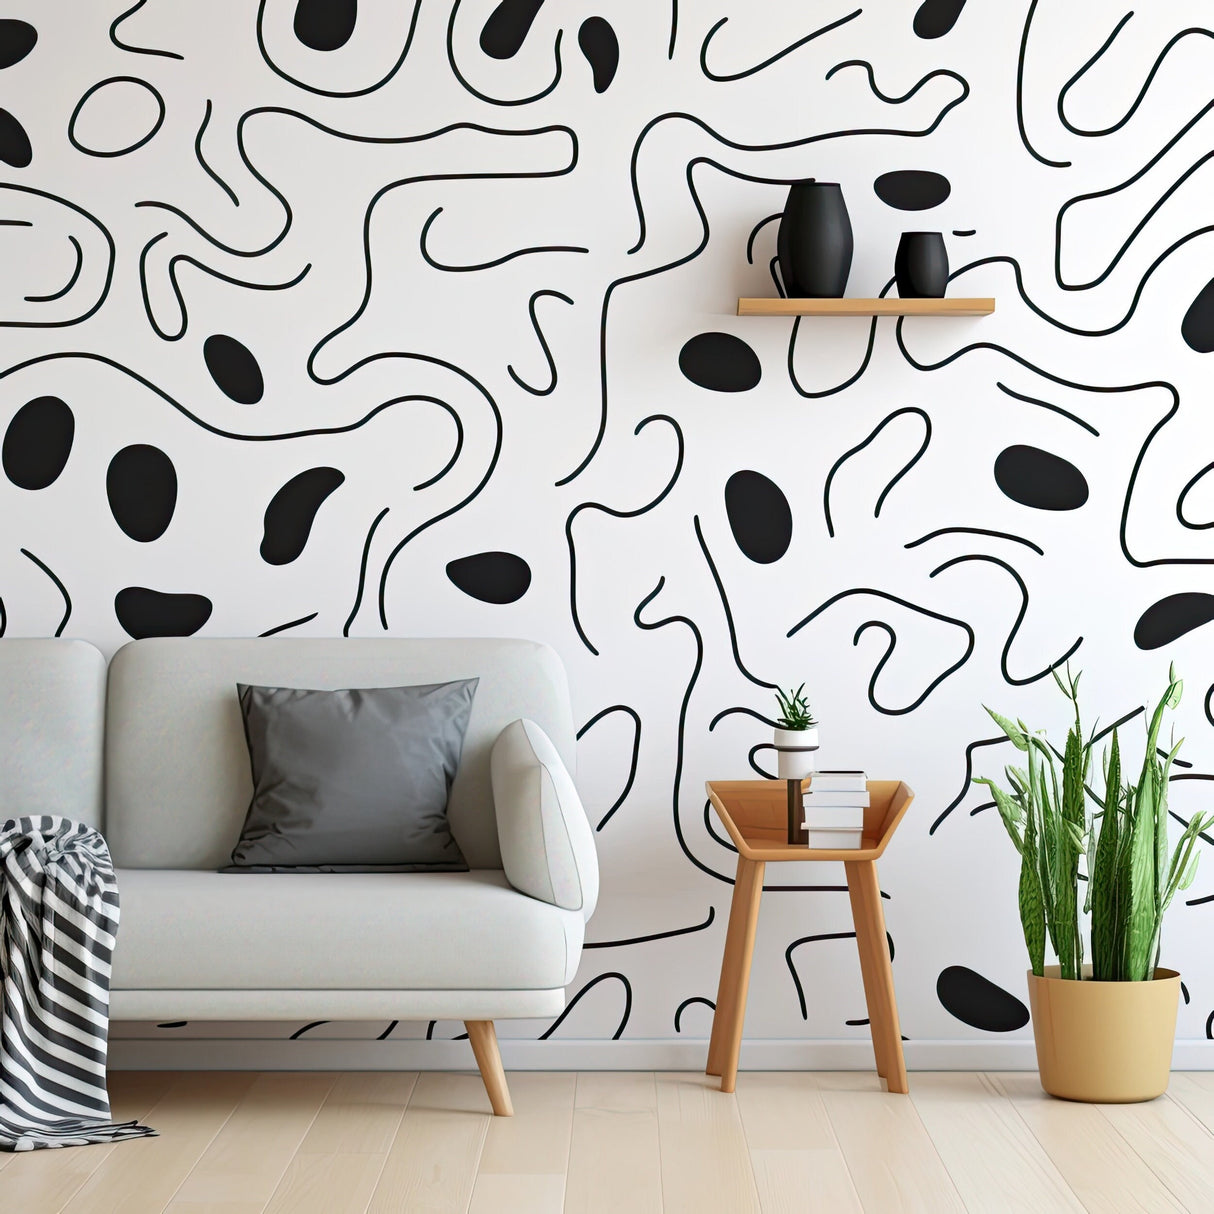 Modern Black Wall Stickers - Dynamic Line Art Decals for Stylish Interior